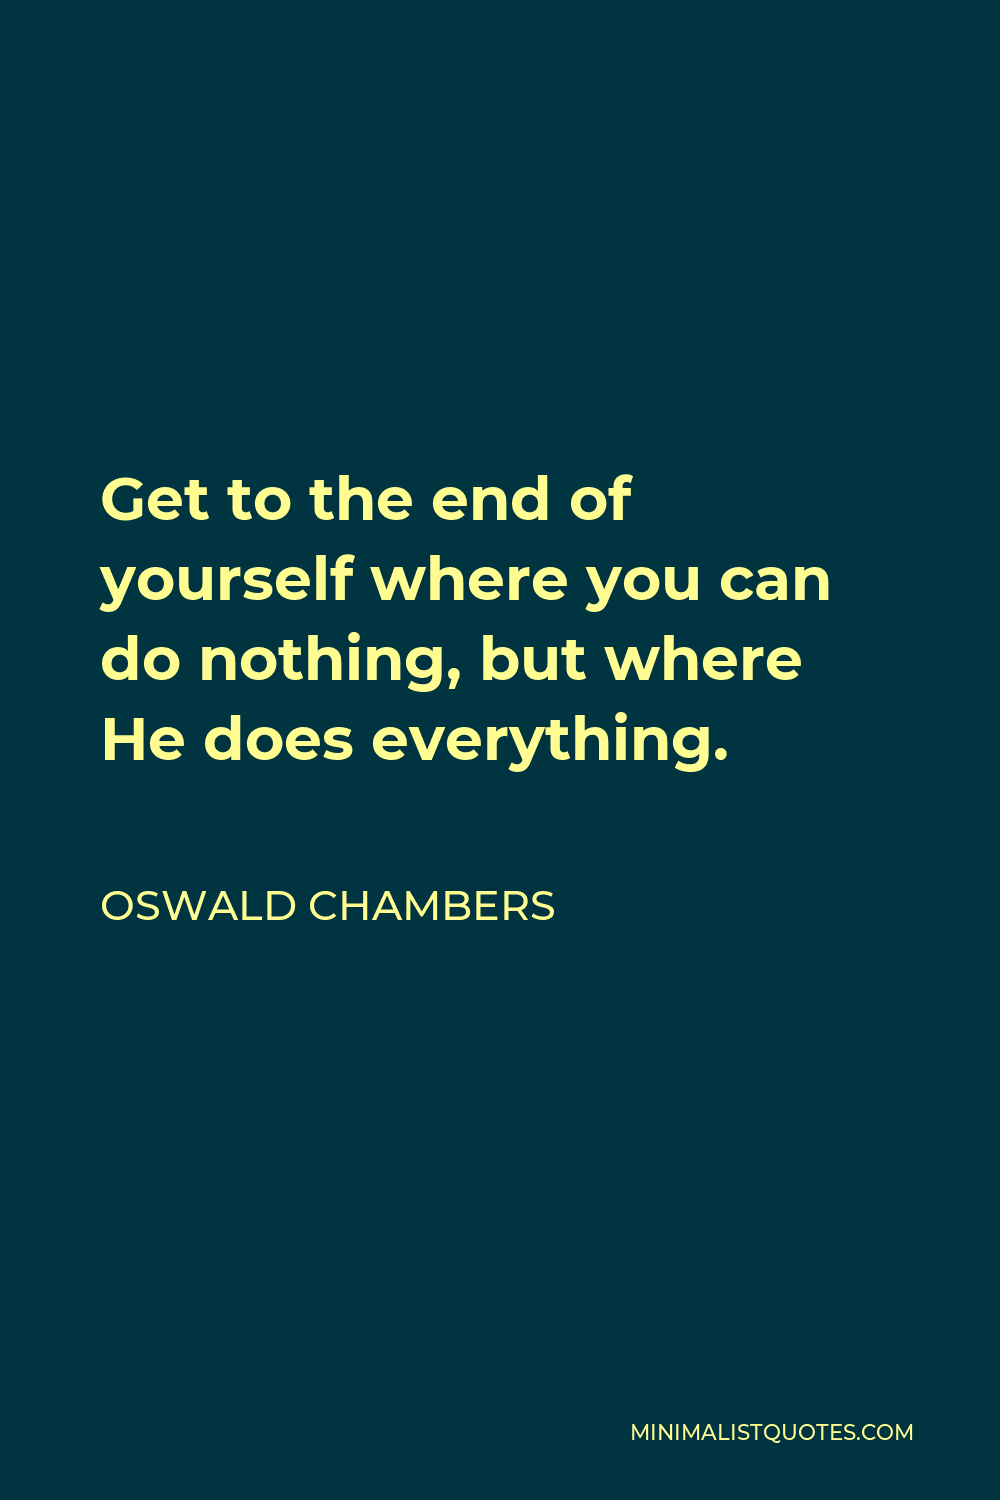 Oswald Chambers Quote - Get to the end of yourself where you can do nothing, but where He does everything.